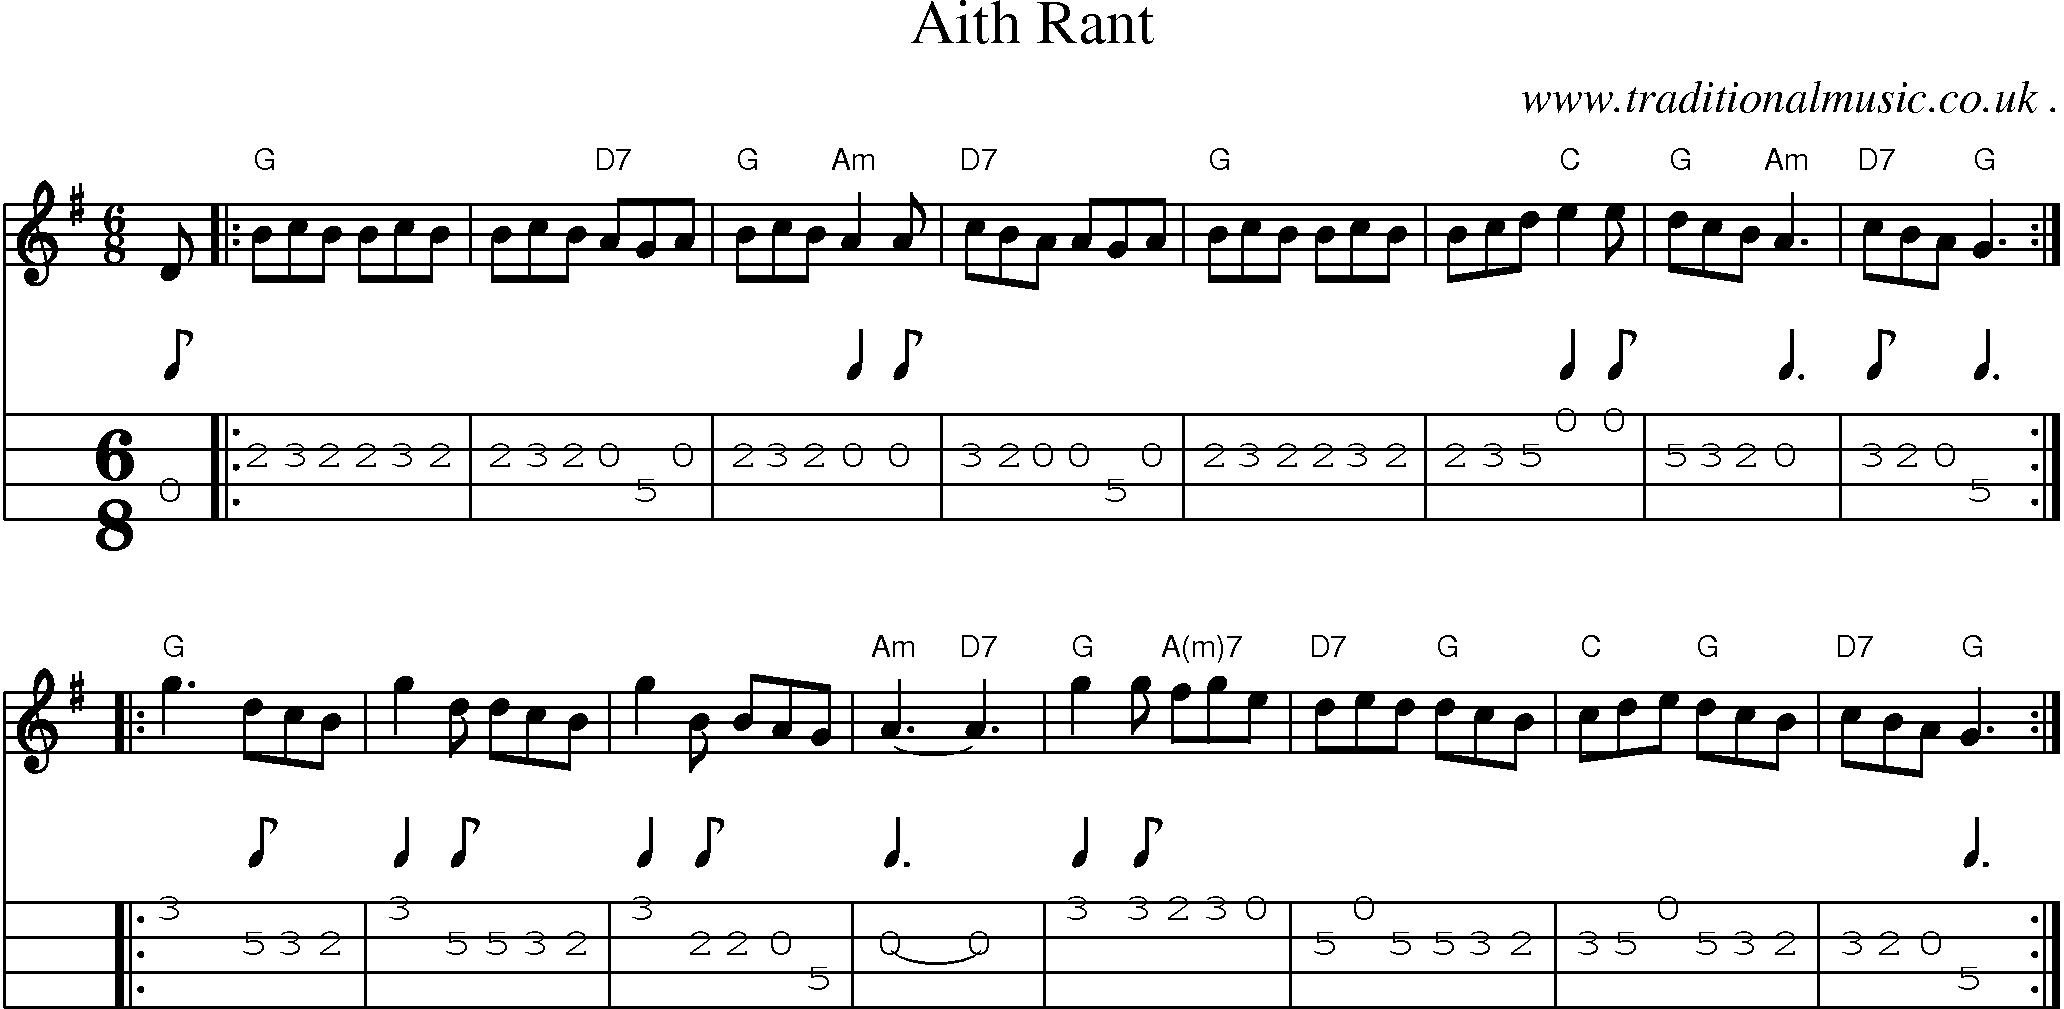 Sheet-music  score, Chords and Mandolin Tabs for Aith Rant